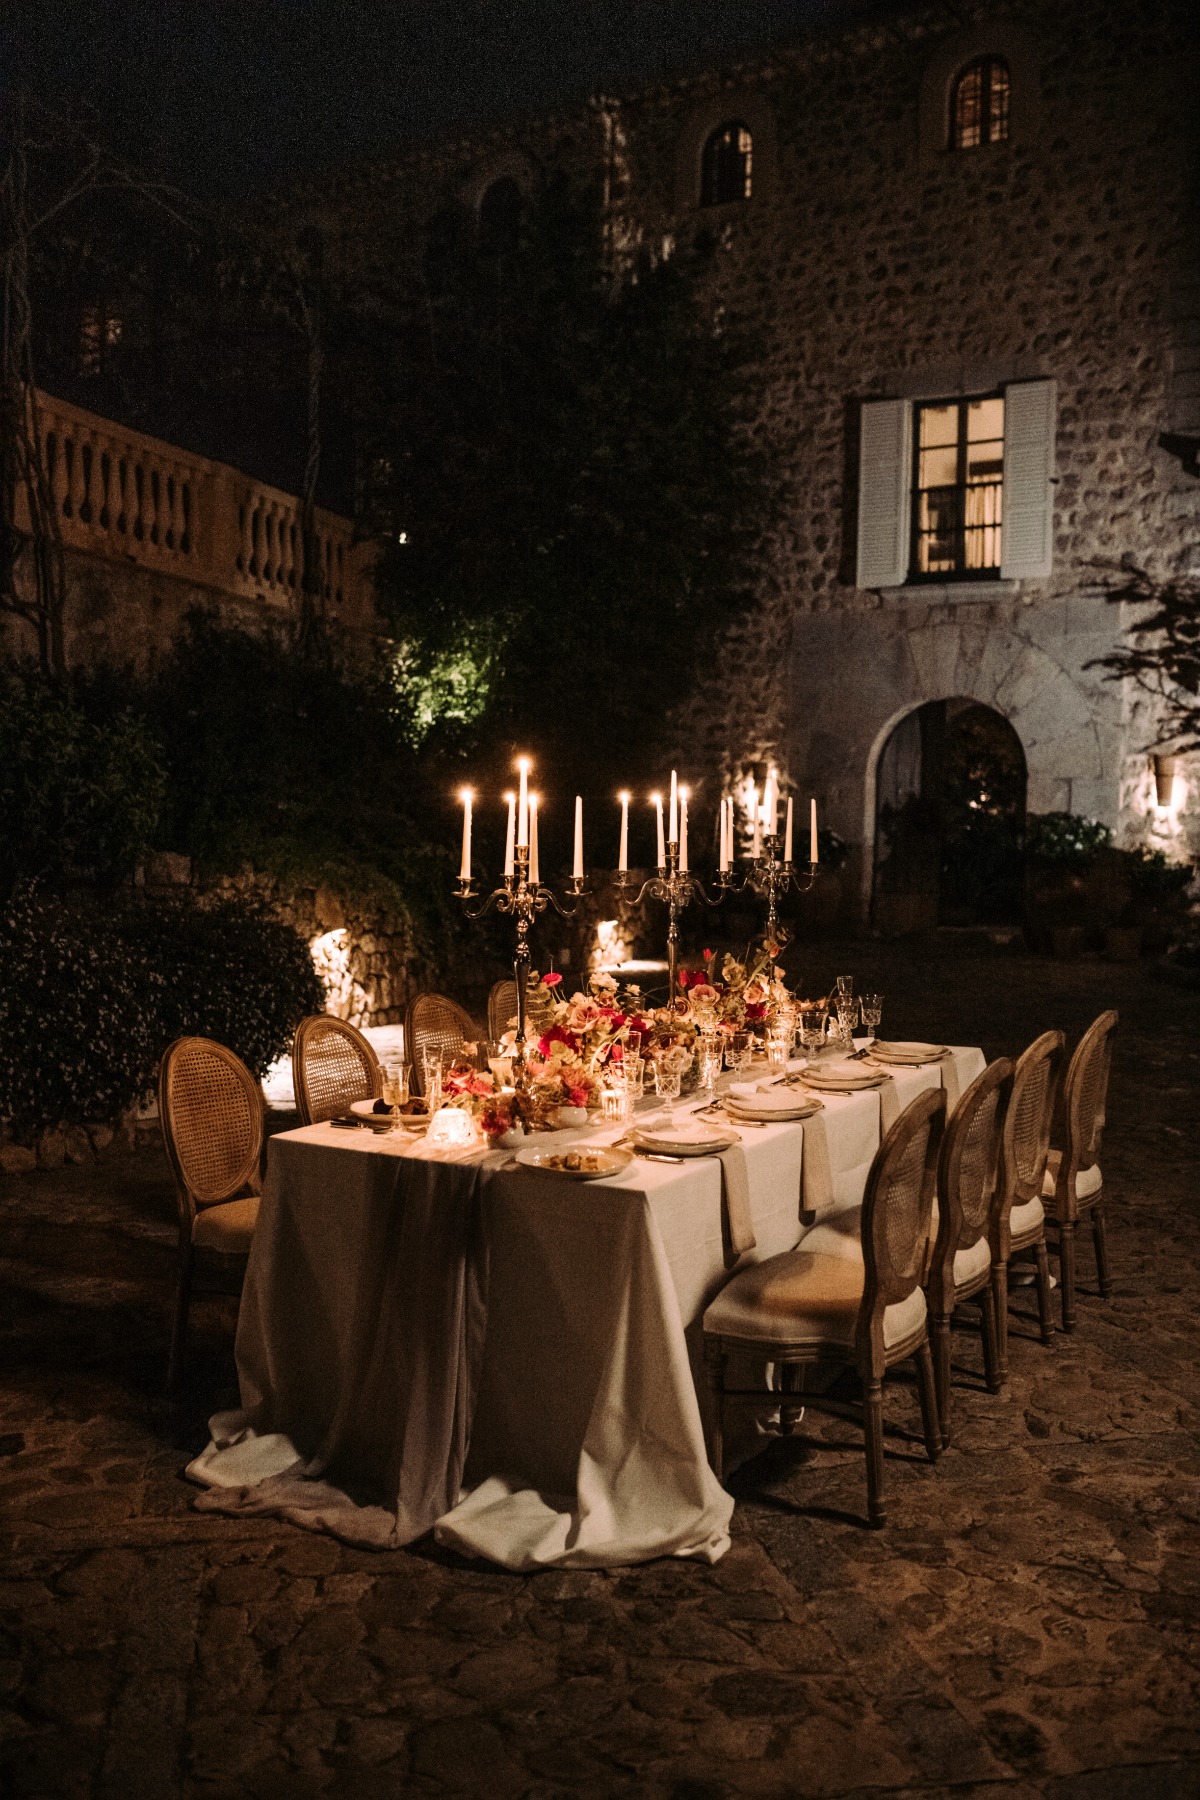 We absolutely love this gorgeously romantic Spanish finca wedding